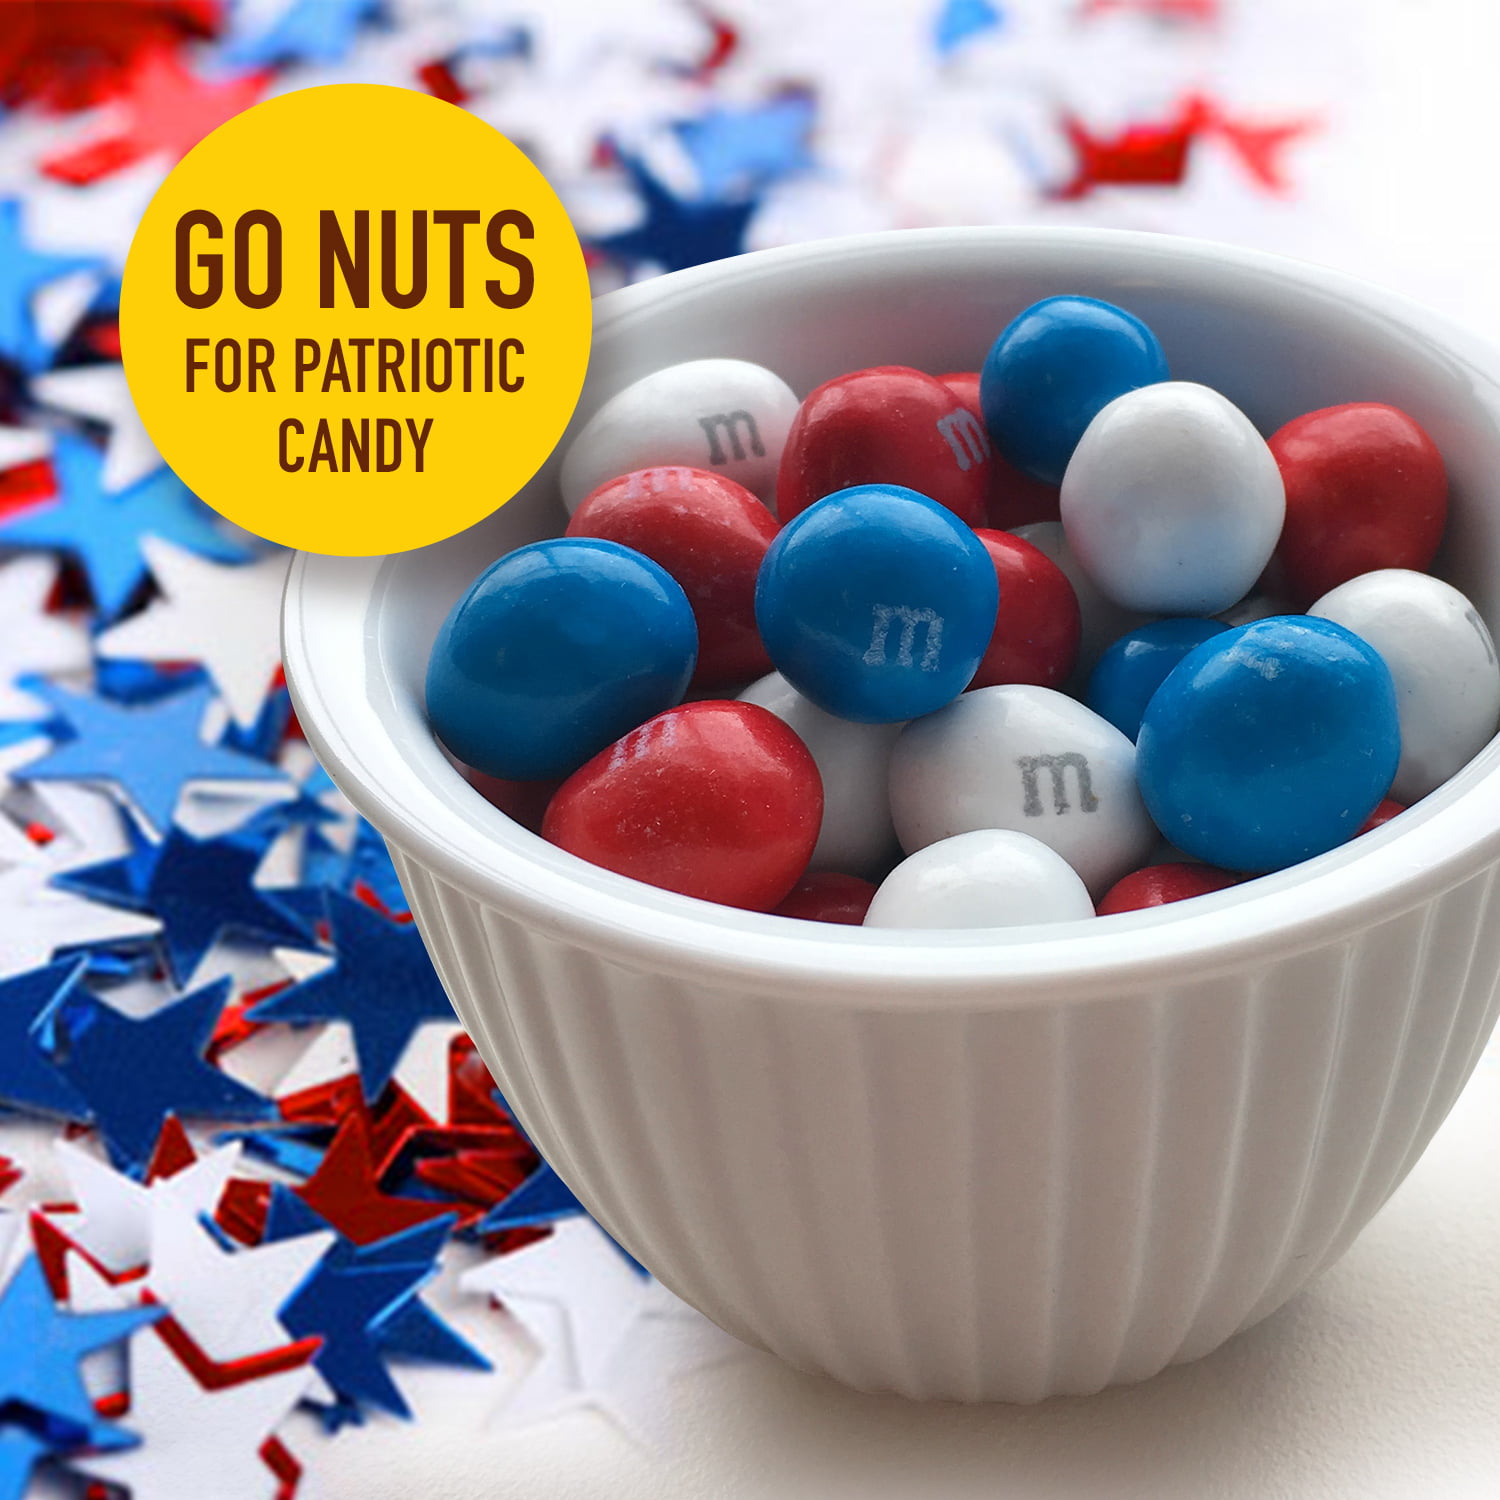 M&M's Peanut Butter Red, White & Blue Patriotic Chocolate Candy, 2.83 Oz.  Bag